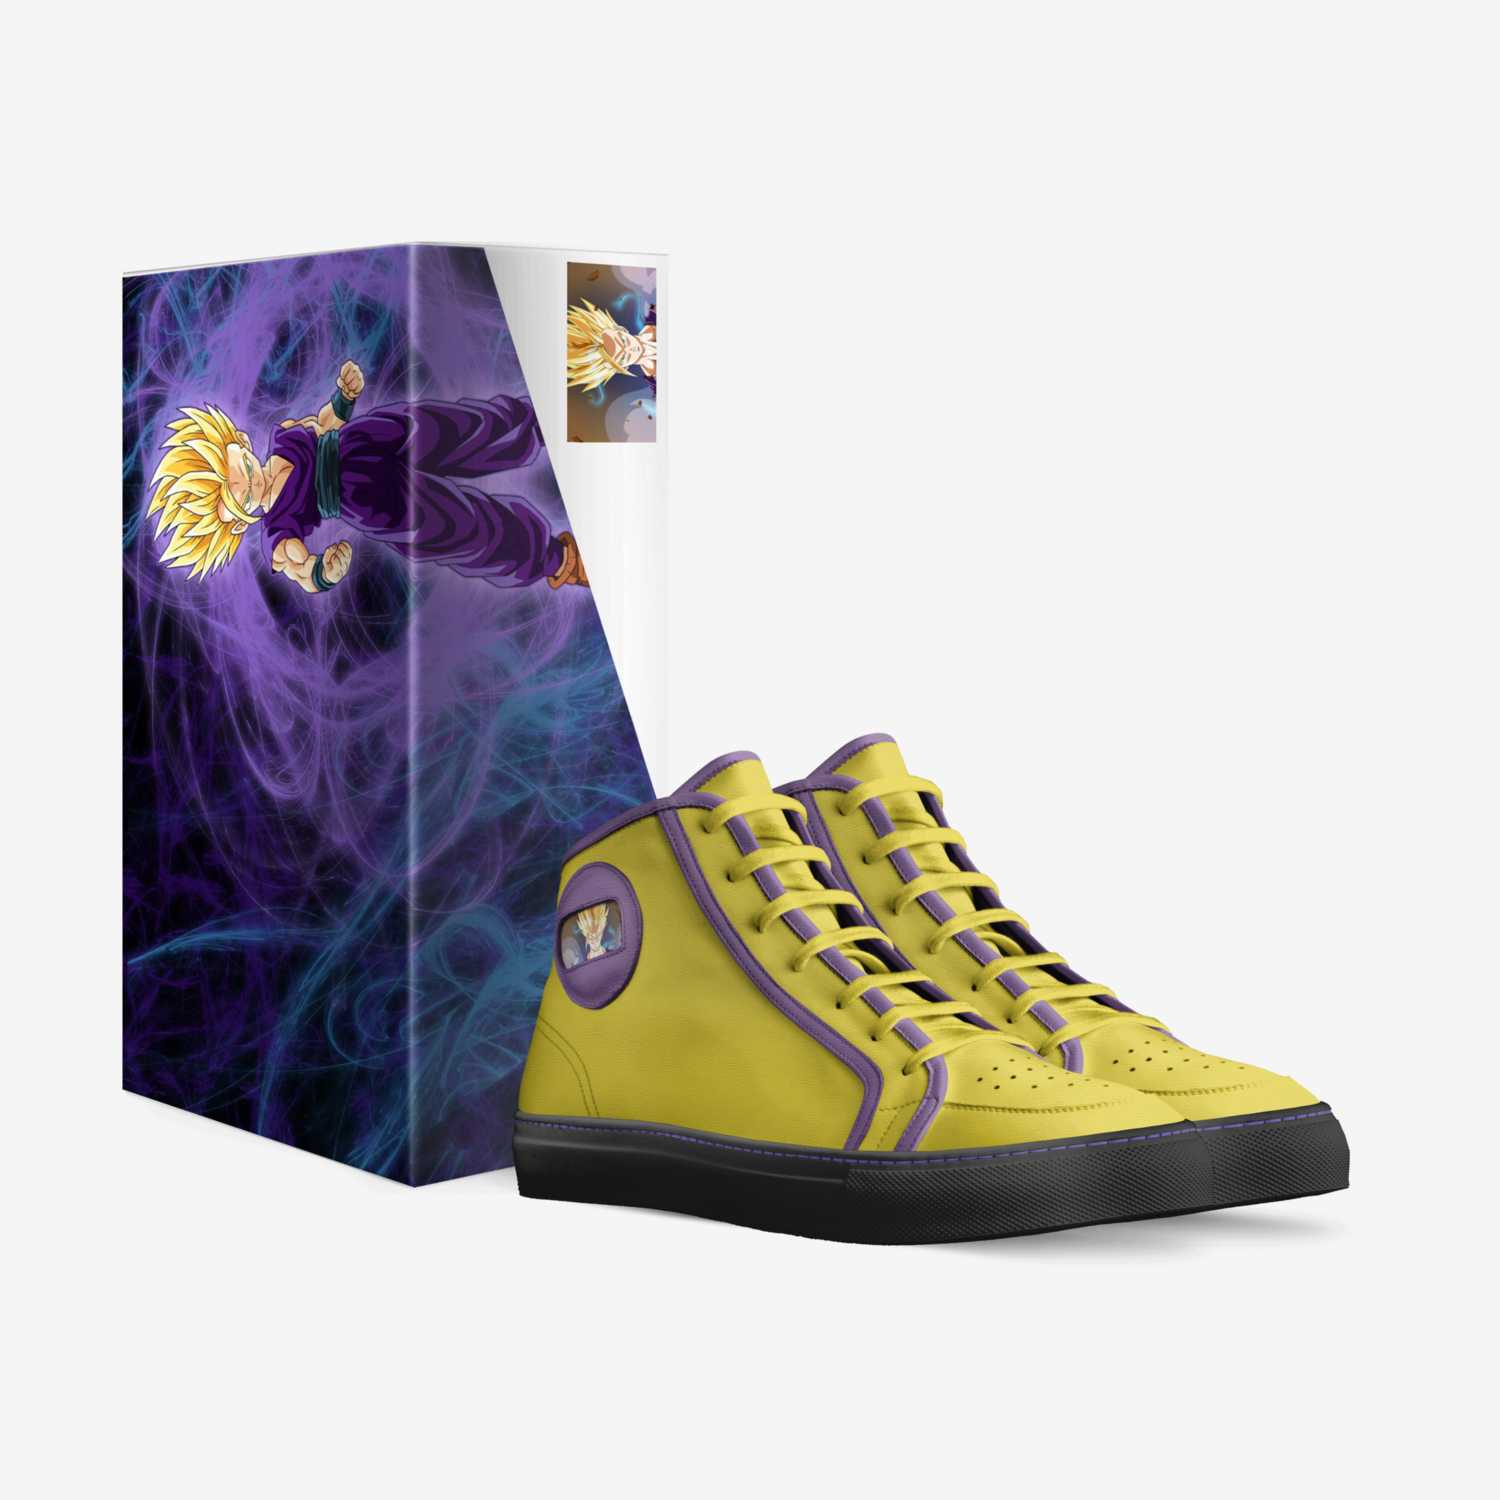 DBZ 8 custom made in Italy shoes by Biboqurn | Box view